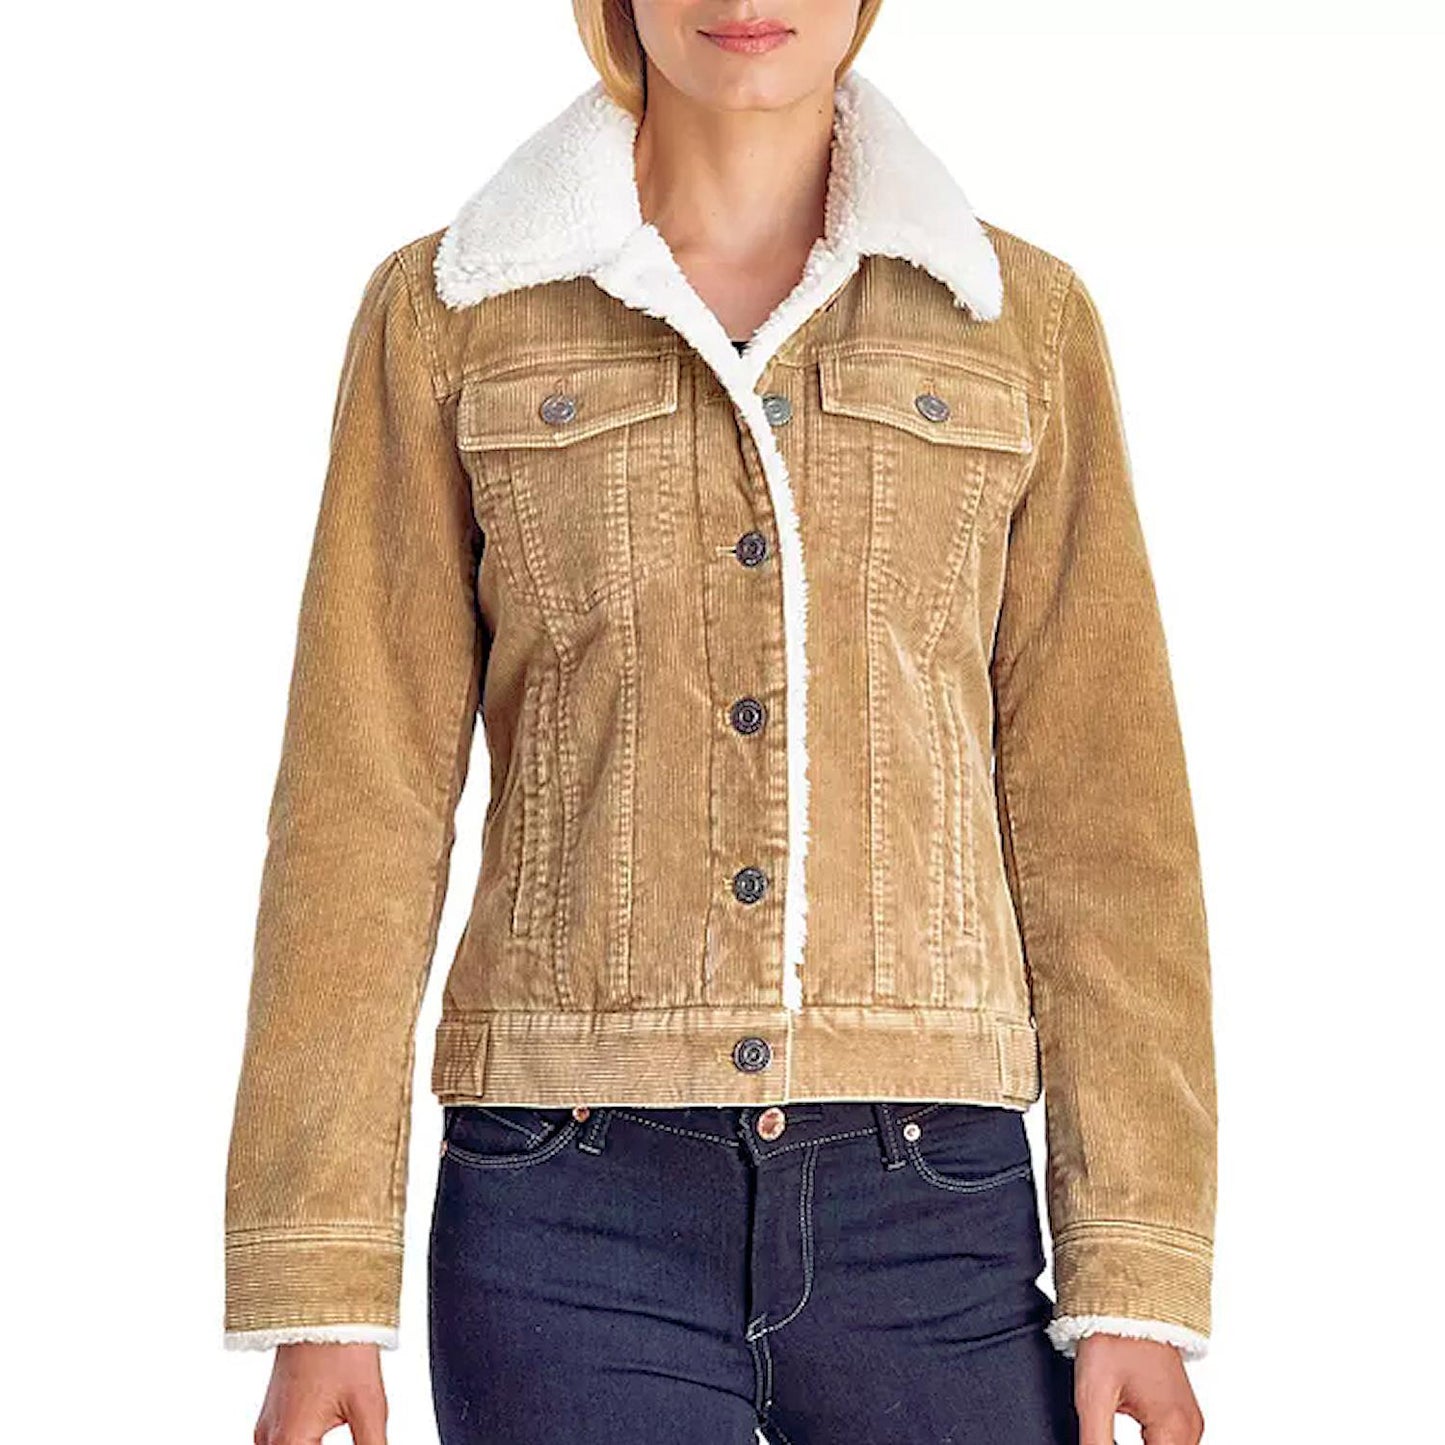 Lucky Brand Ladies Corduroy Jacket Quilt Lined Camel M